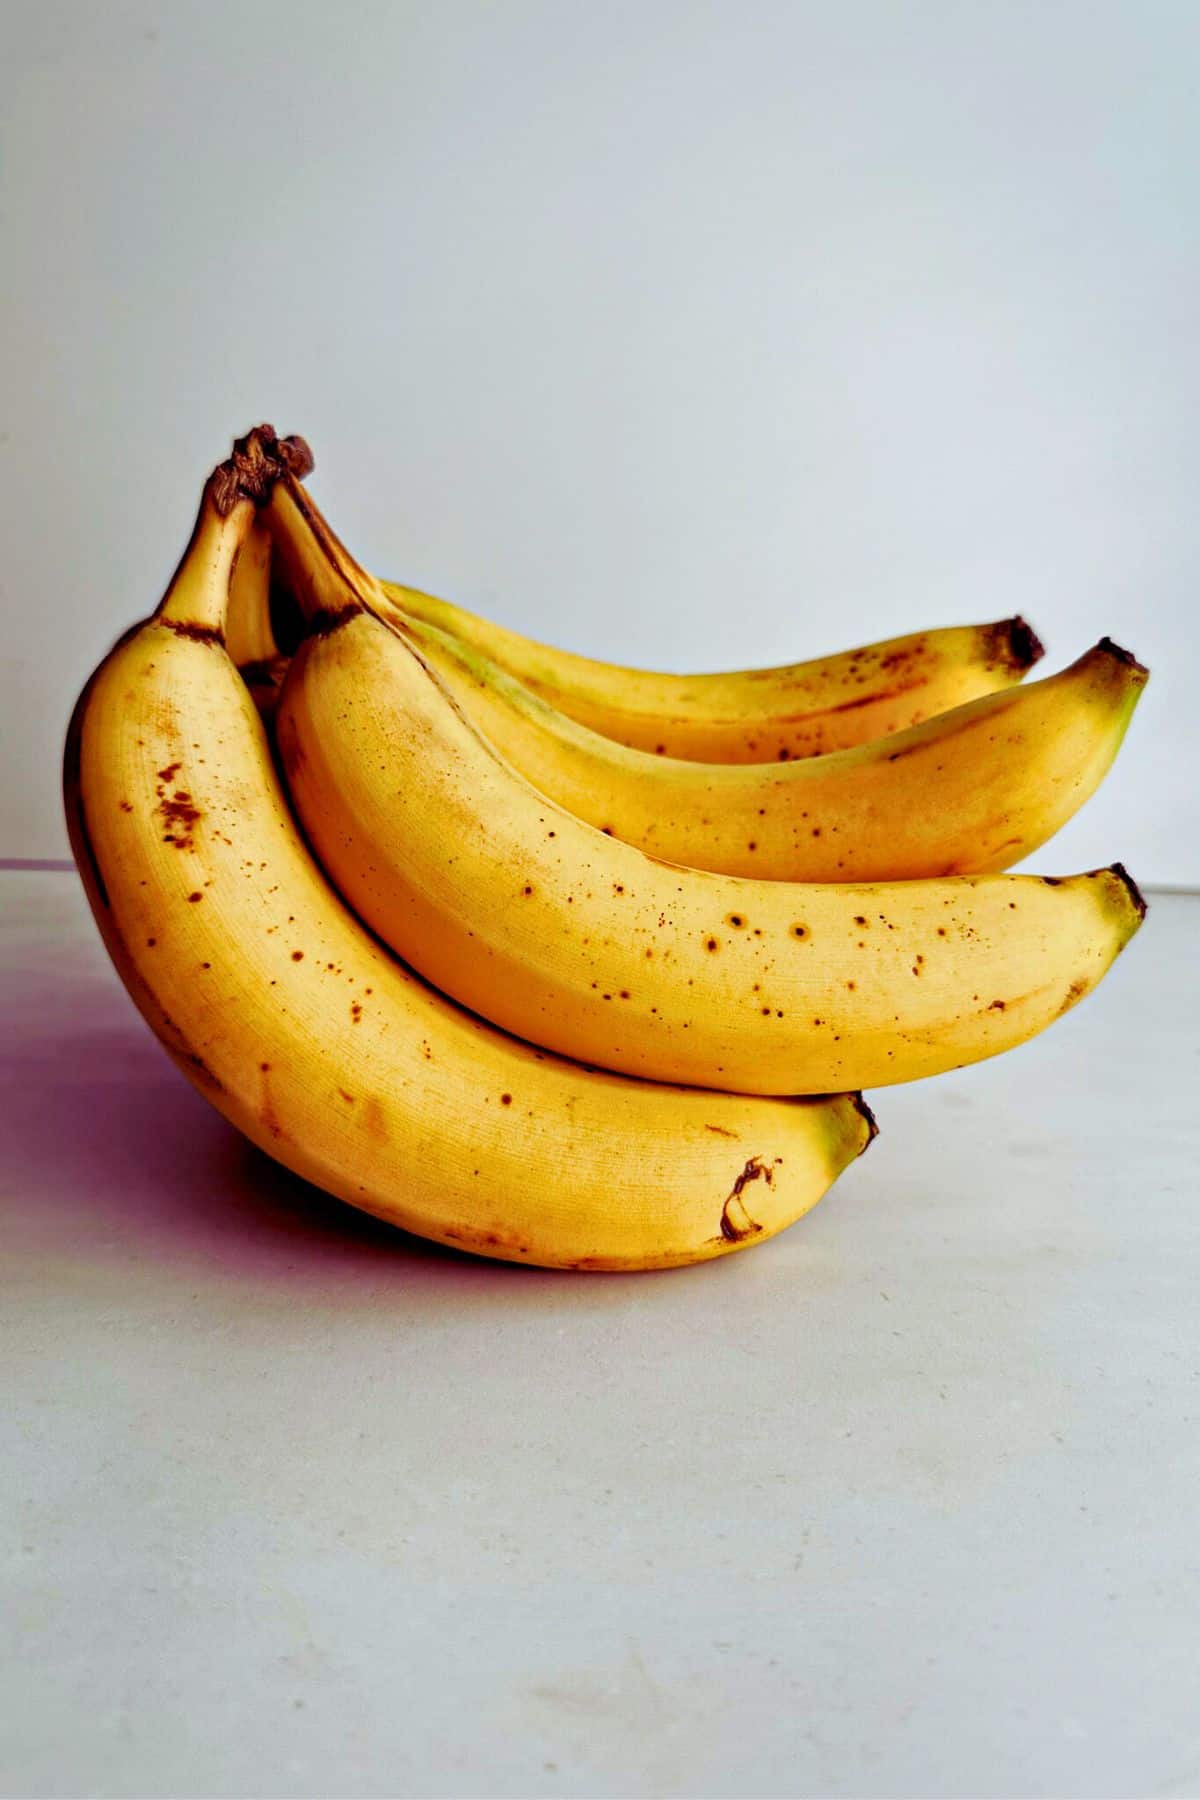 bunch of bananas on a gray background